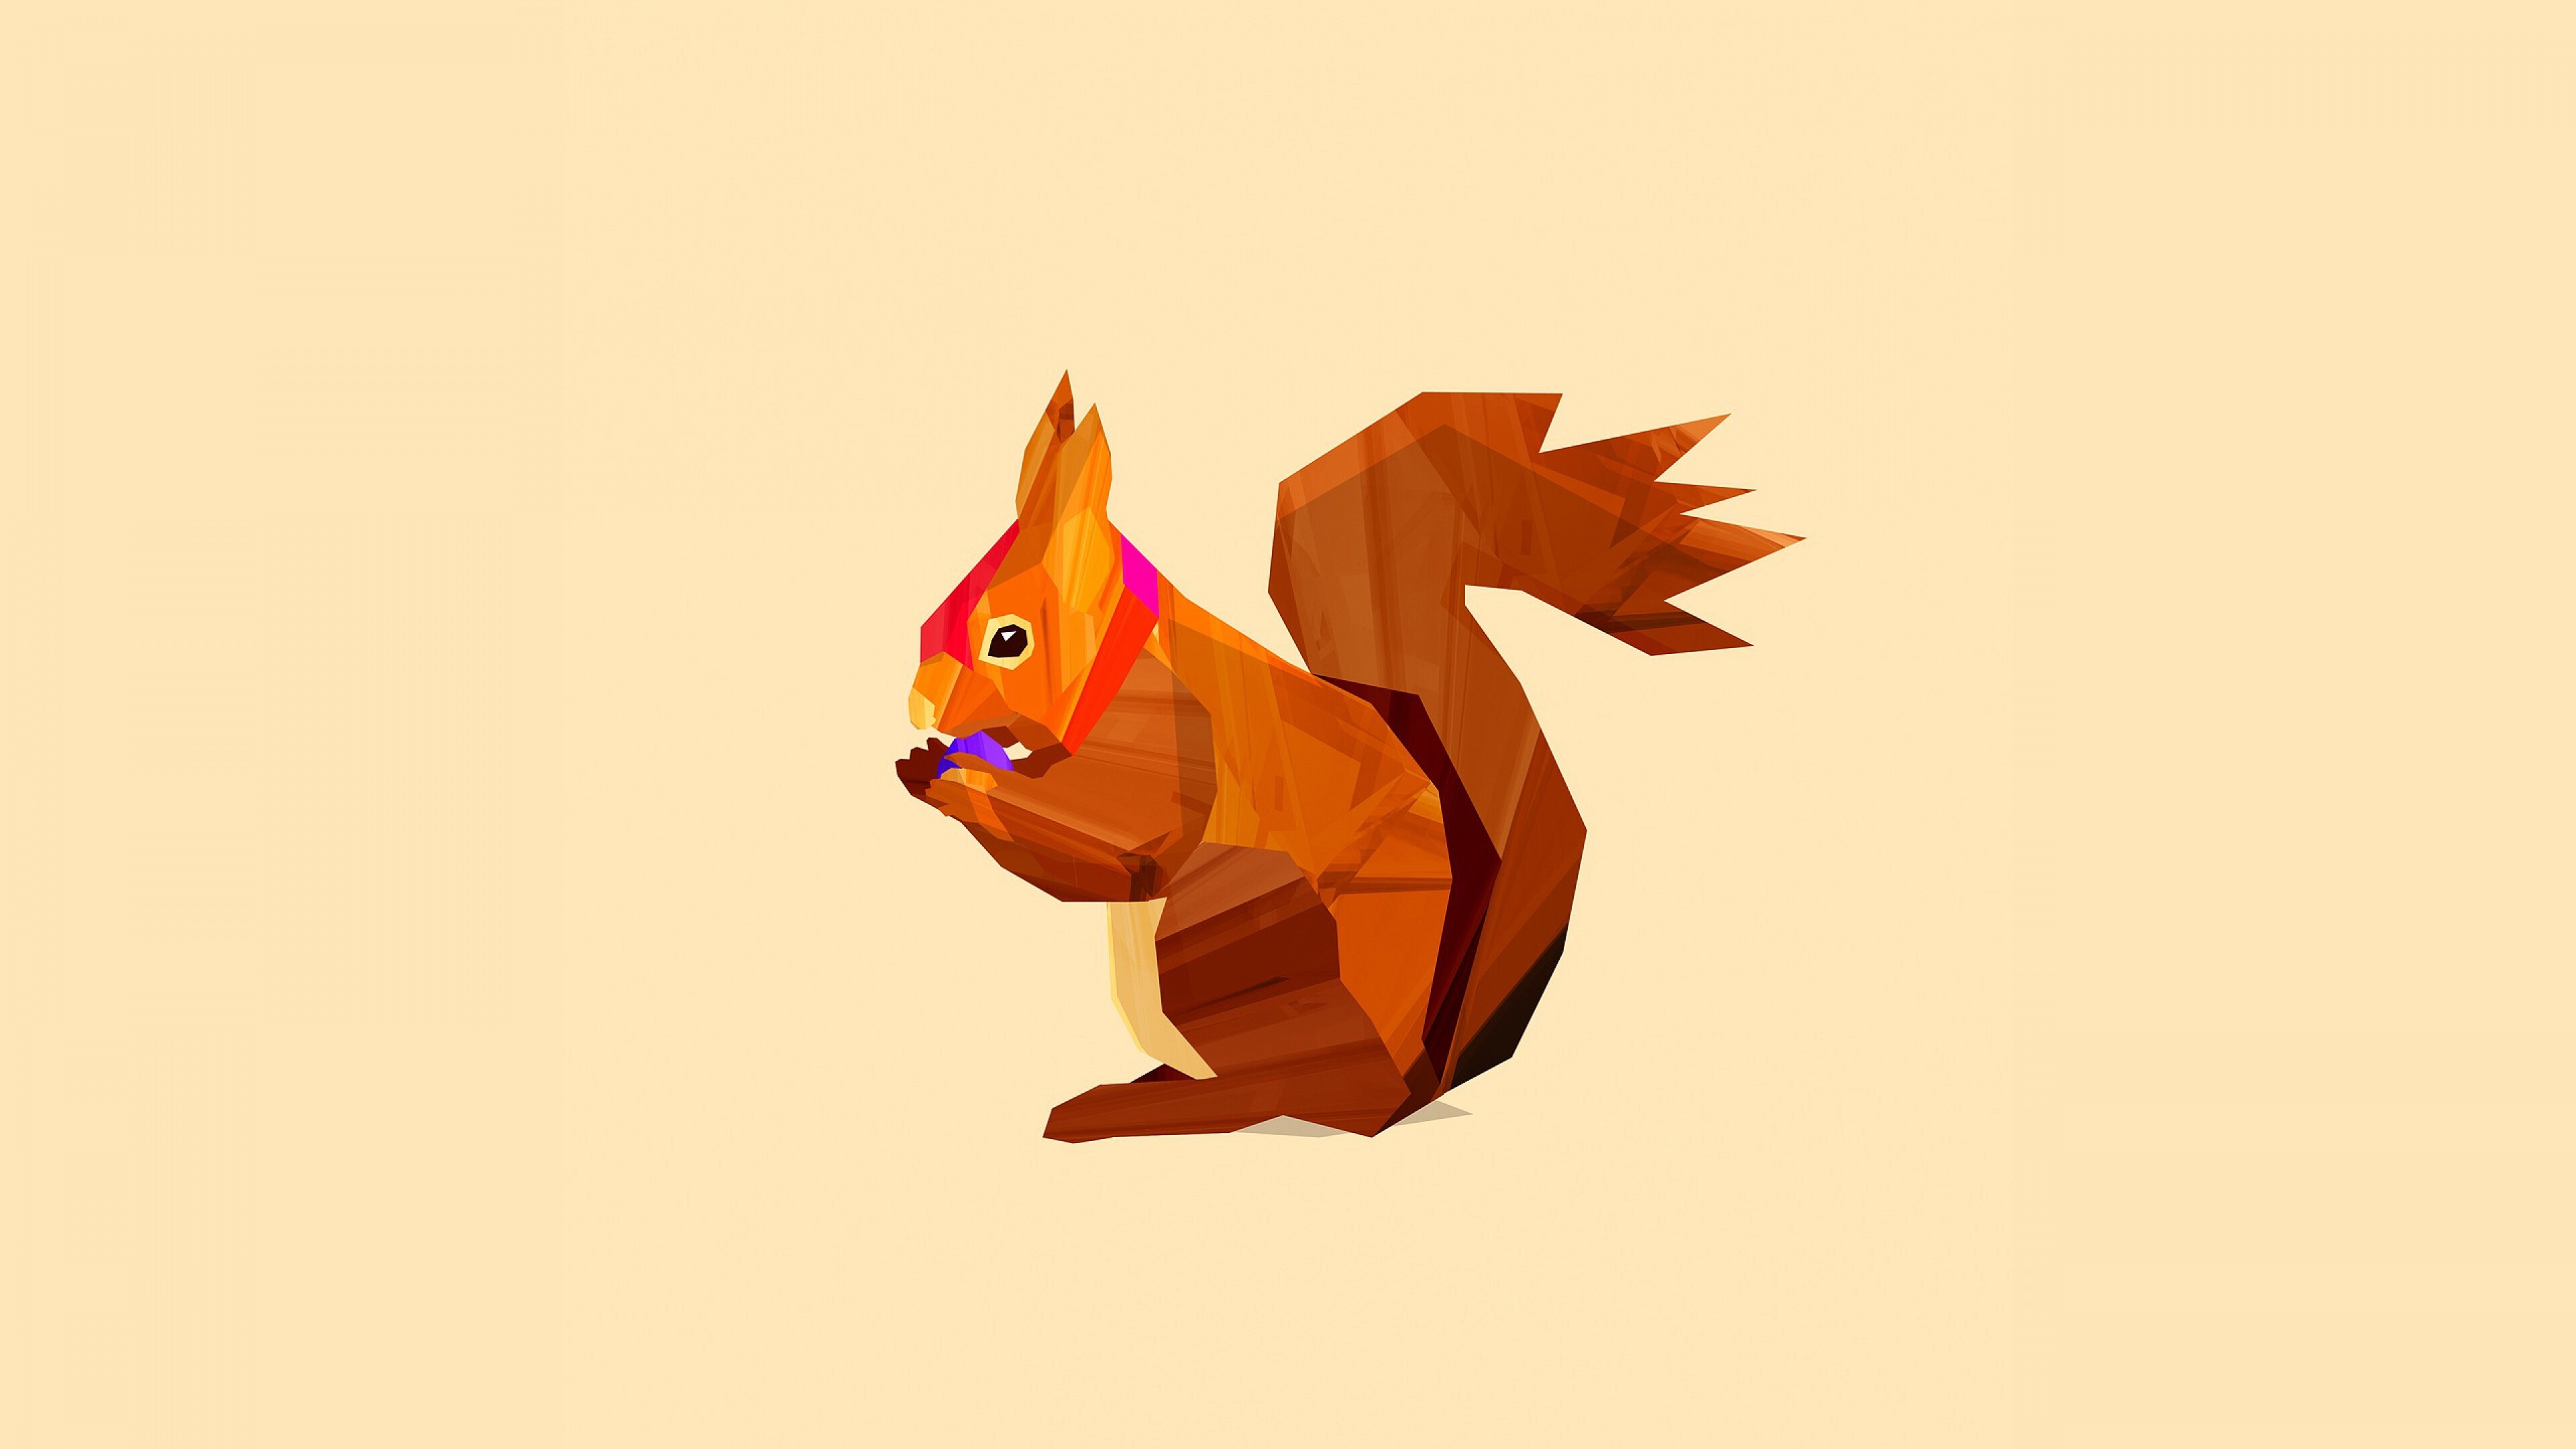 Squirrel: Animal, Typically has a long, bushy tail and small pointed ears. 3840x2160 4K Wallpaper.